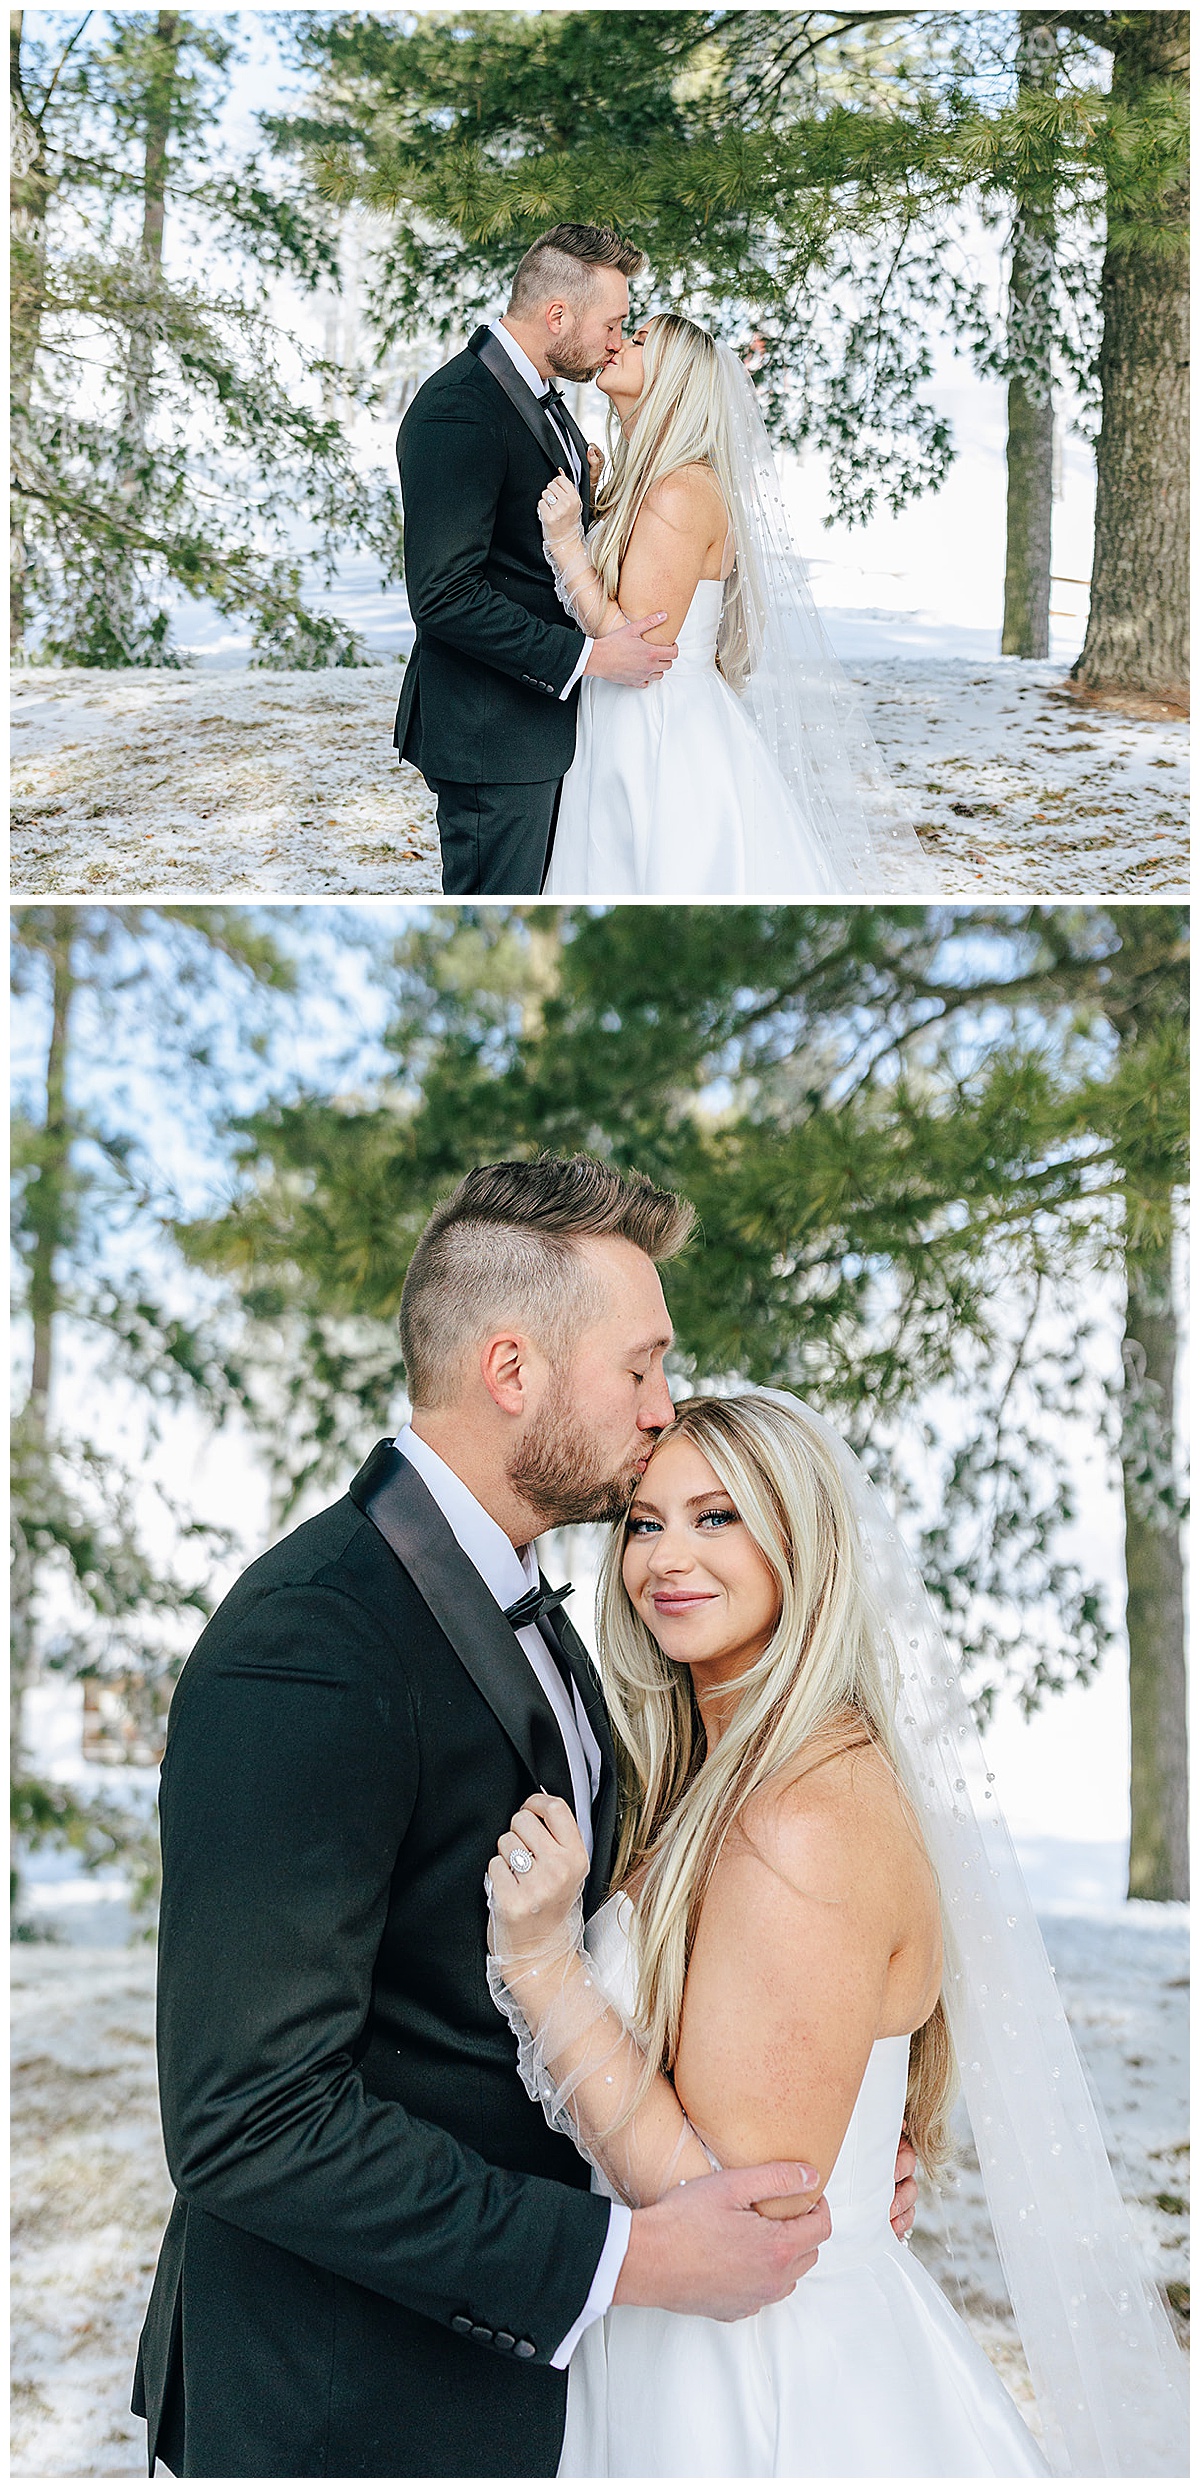 Bride and groom share a kiss for Snowy Winter Wonderland Wedding